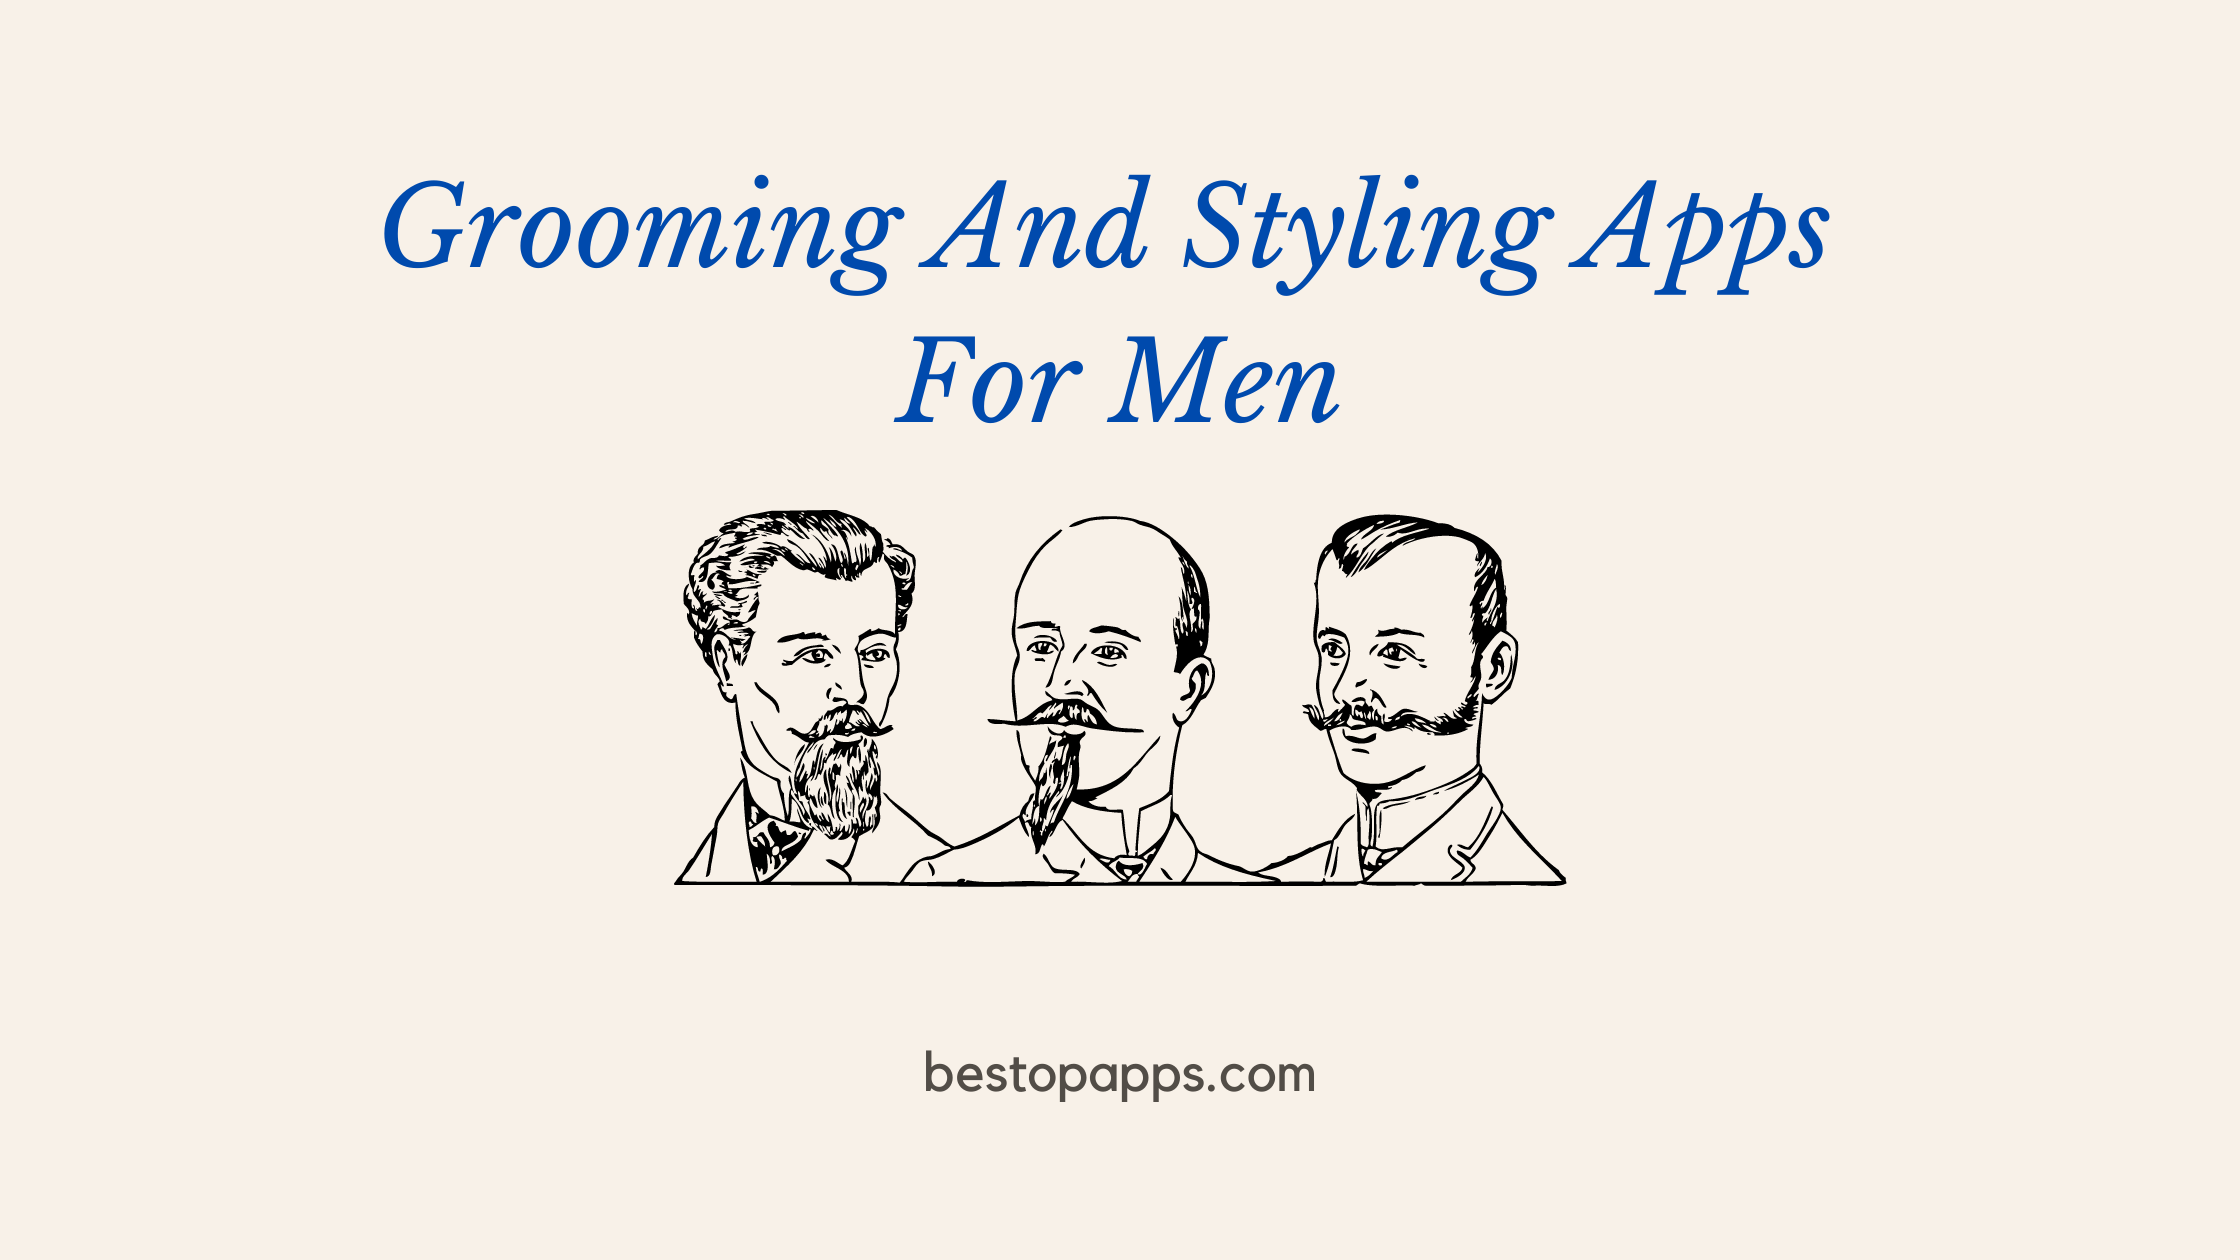 Grooming And Styling Apps For Men